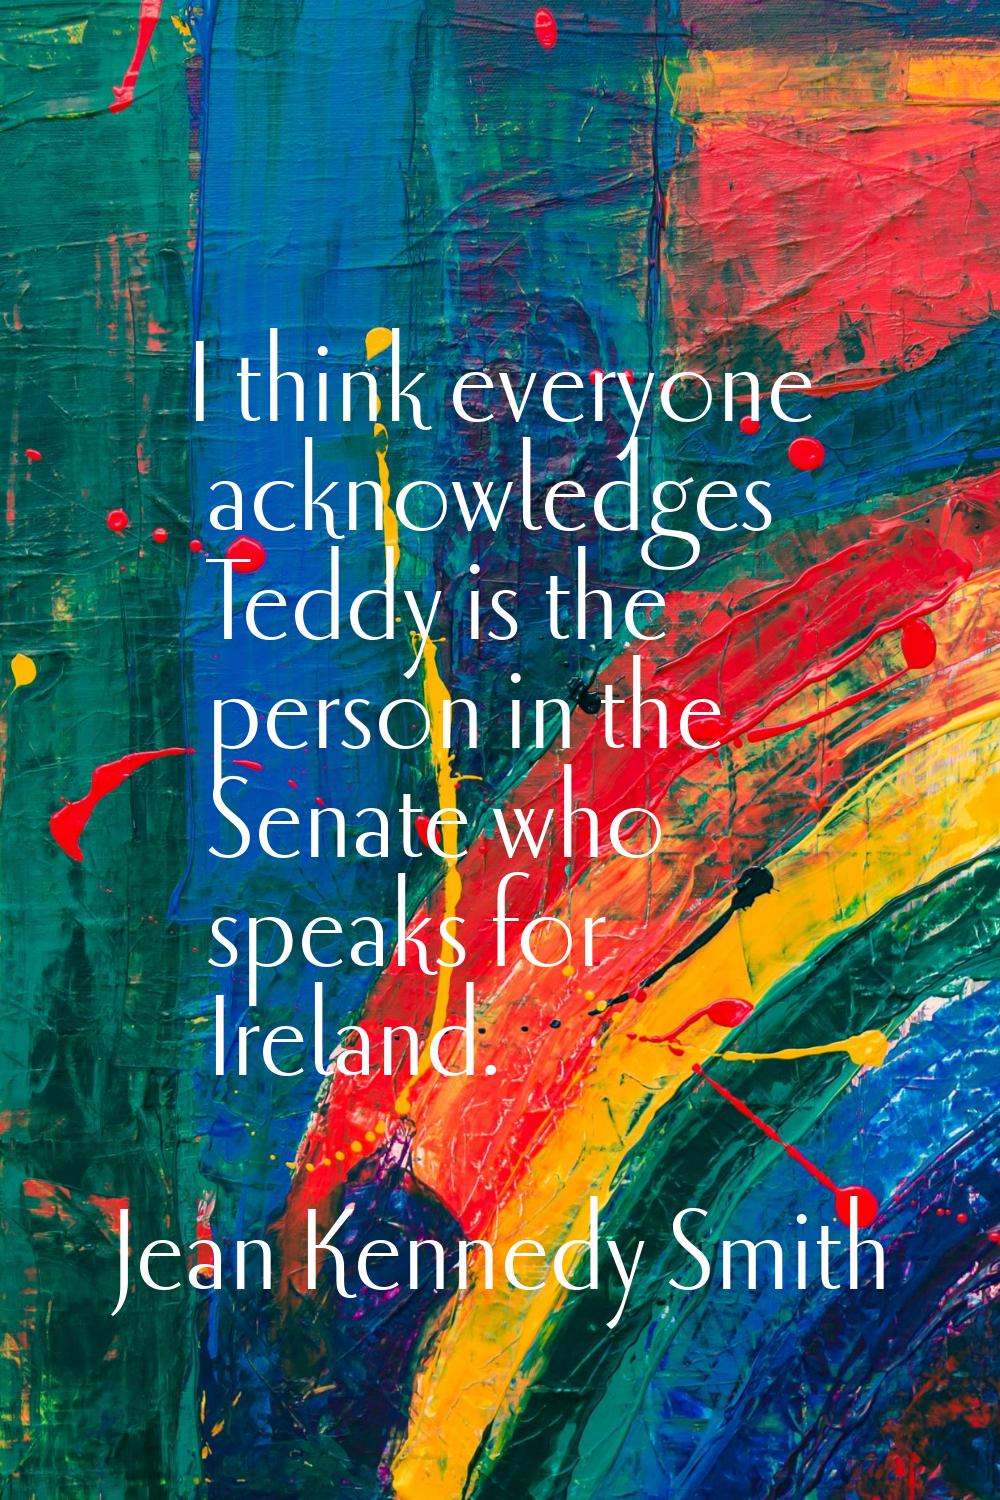 I think everyone acknowledges Teddy is the person in the Senate who speaks for Ireland.